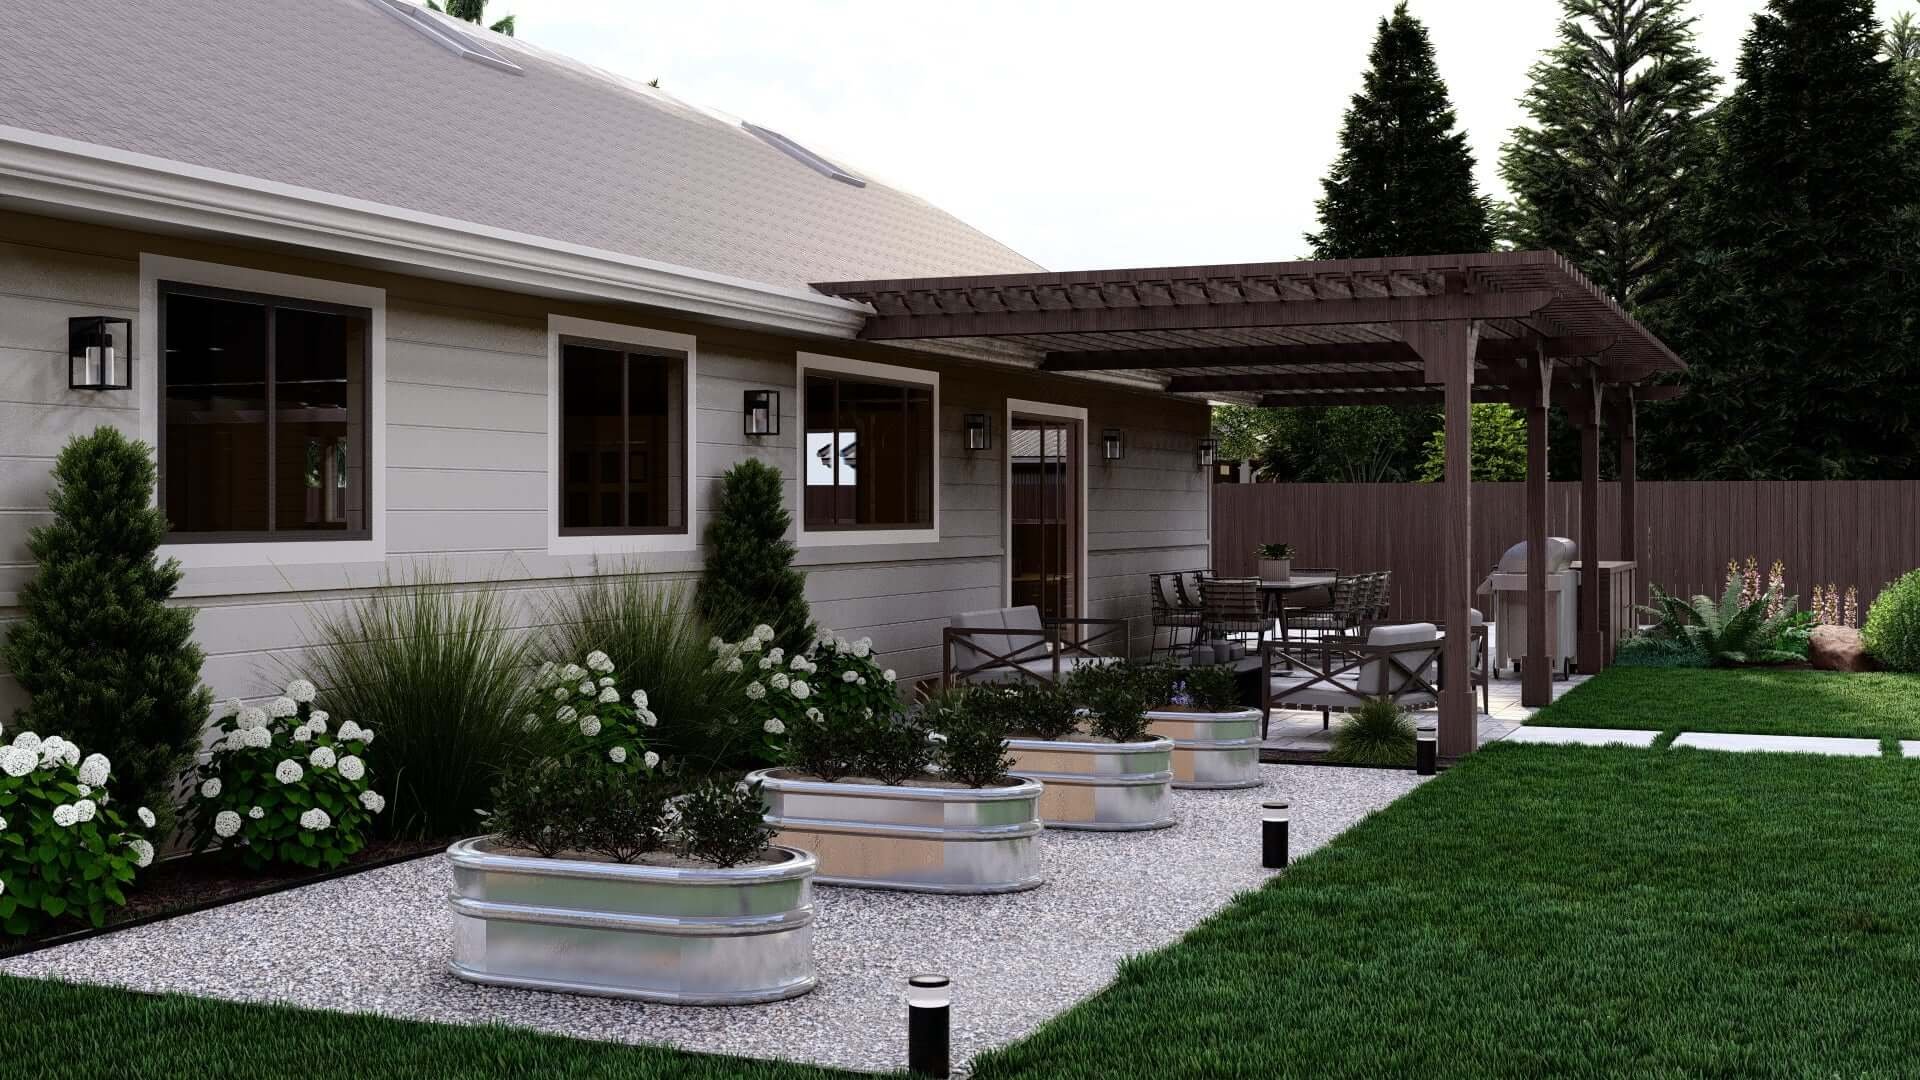 A steady clip of rustic trough planters makes a graphically compelling scene out of a gravel expanse in this design.